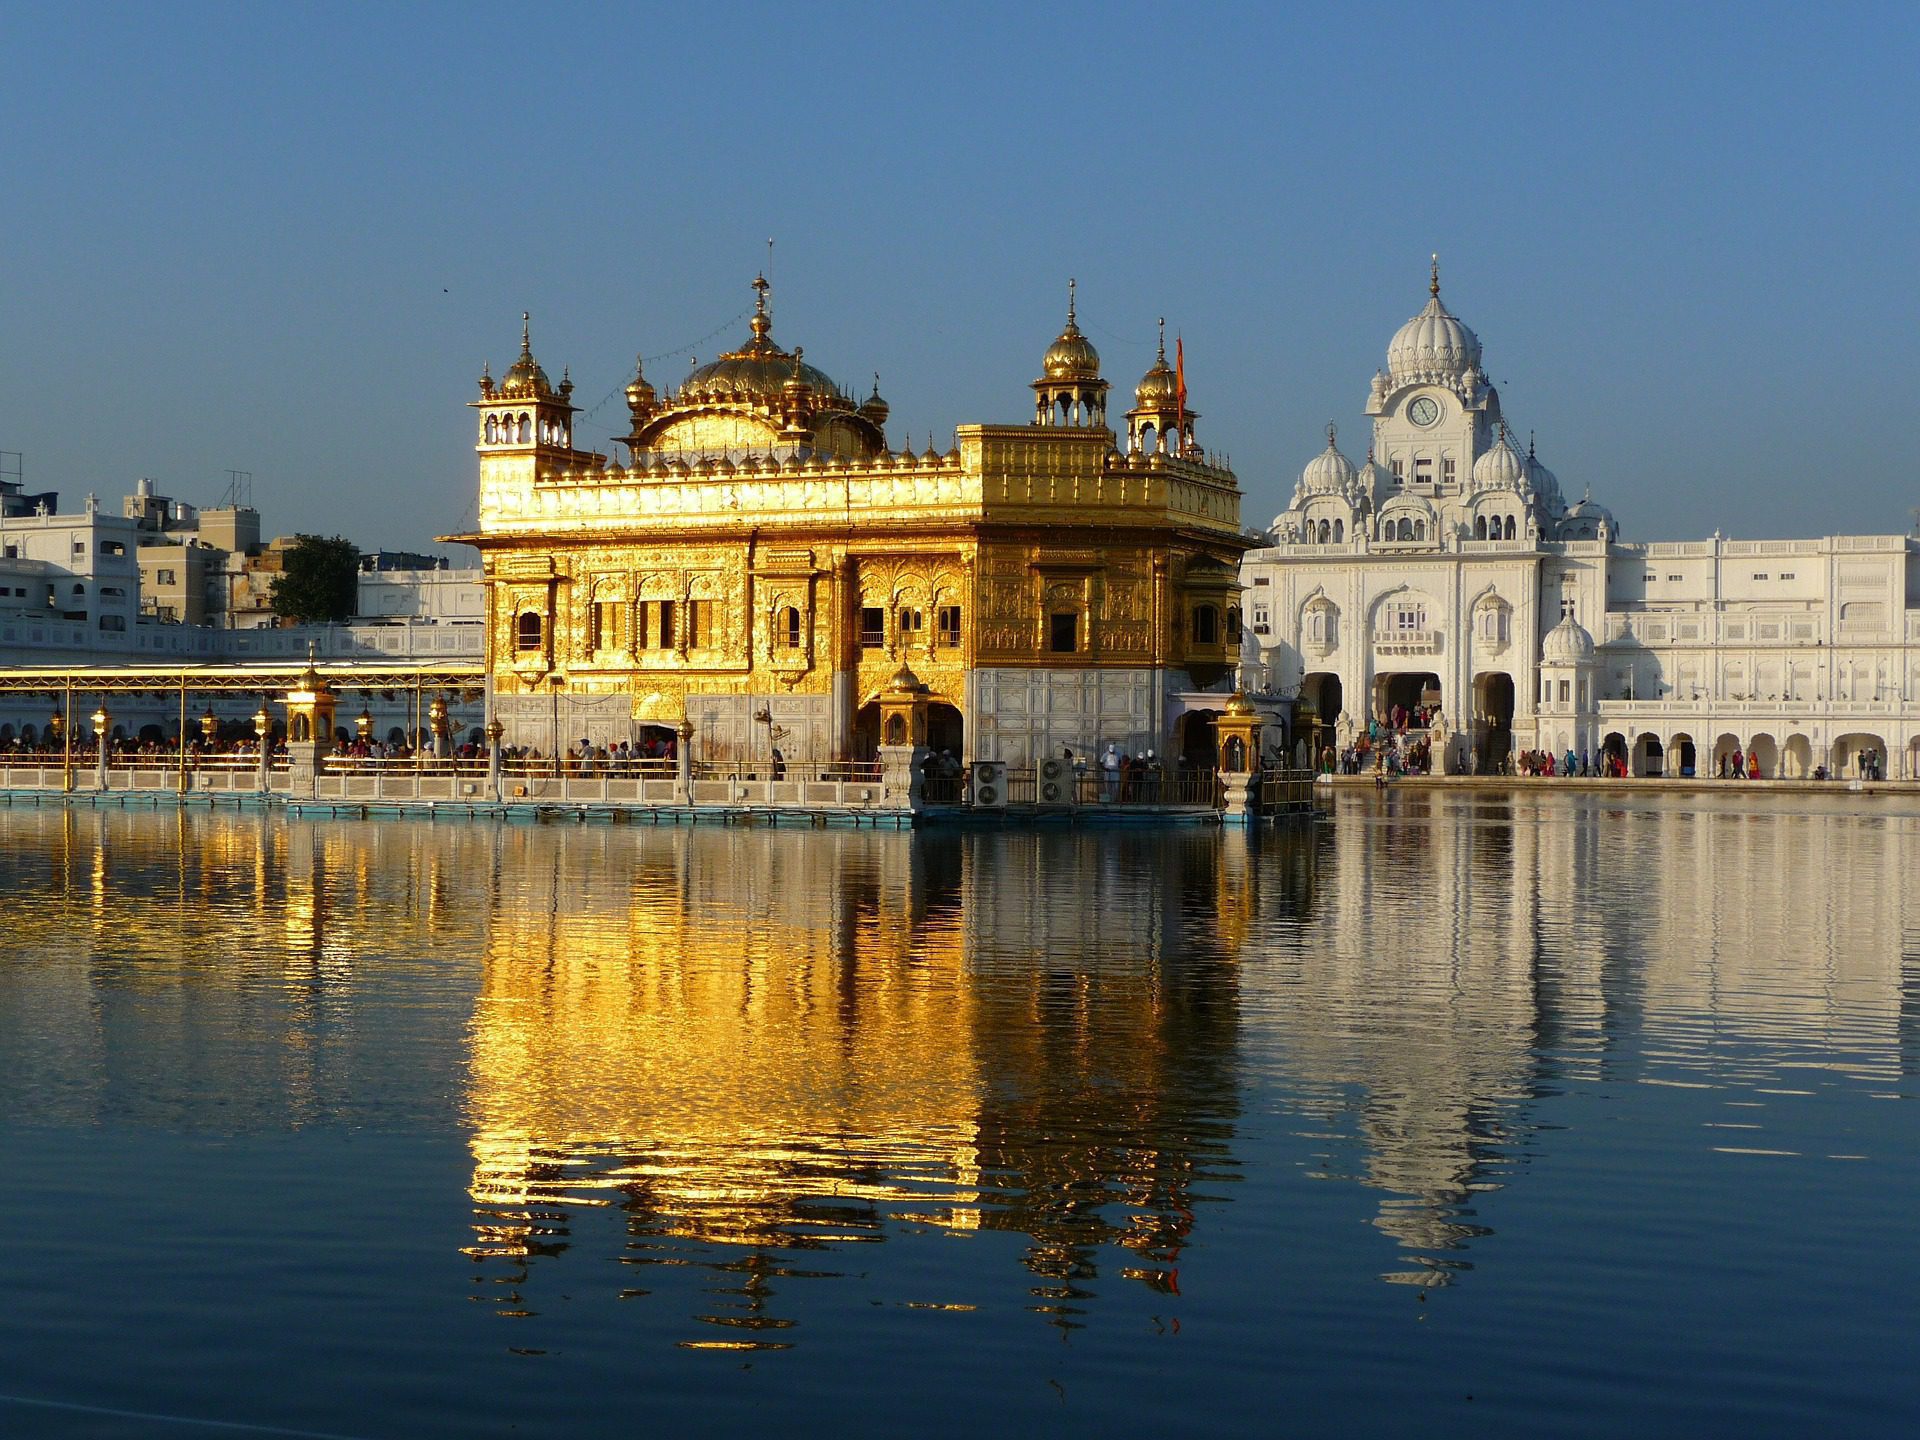 The Golden Temple, India